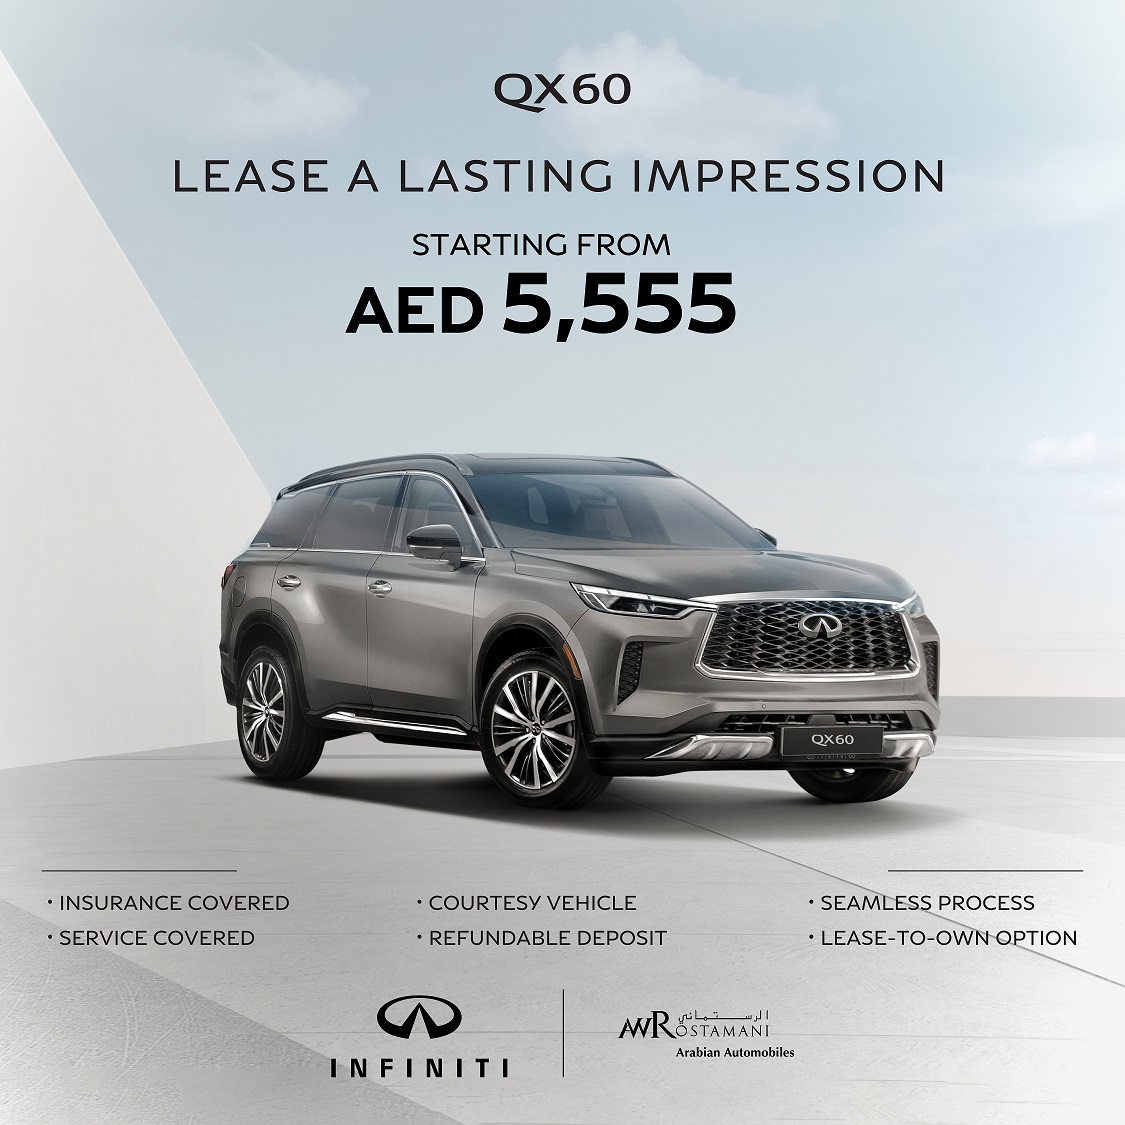 INFINITI of Arabian Automobiles rolls out leasing campaign for QX60 and Q50